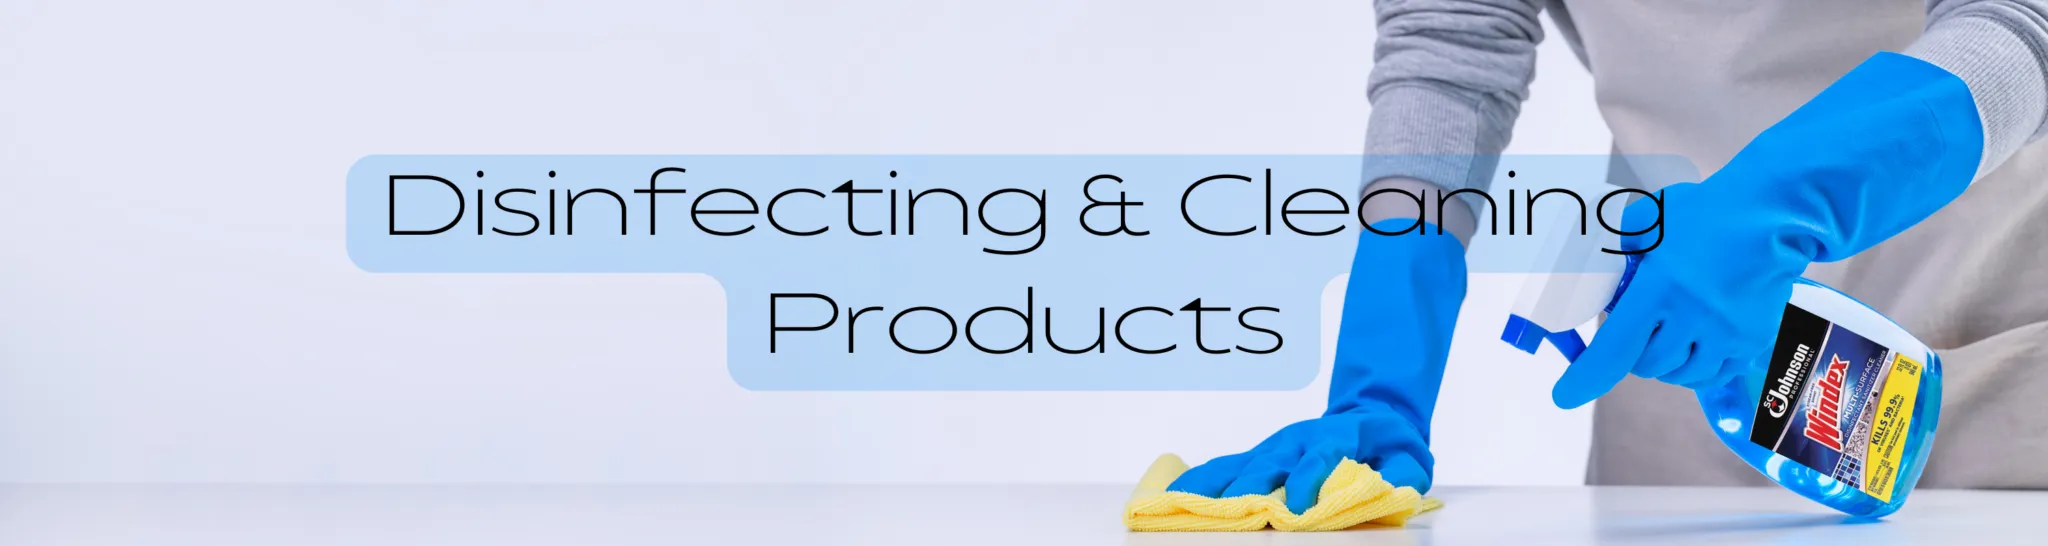 Disinfection-Cleaning-Banner-2048x546